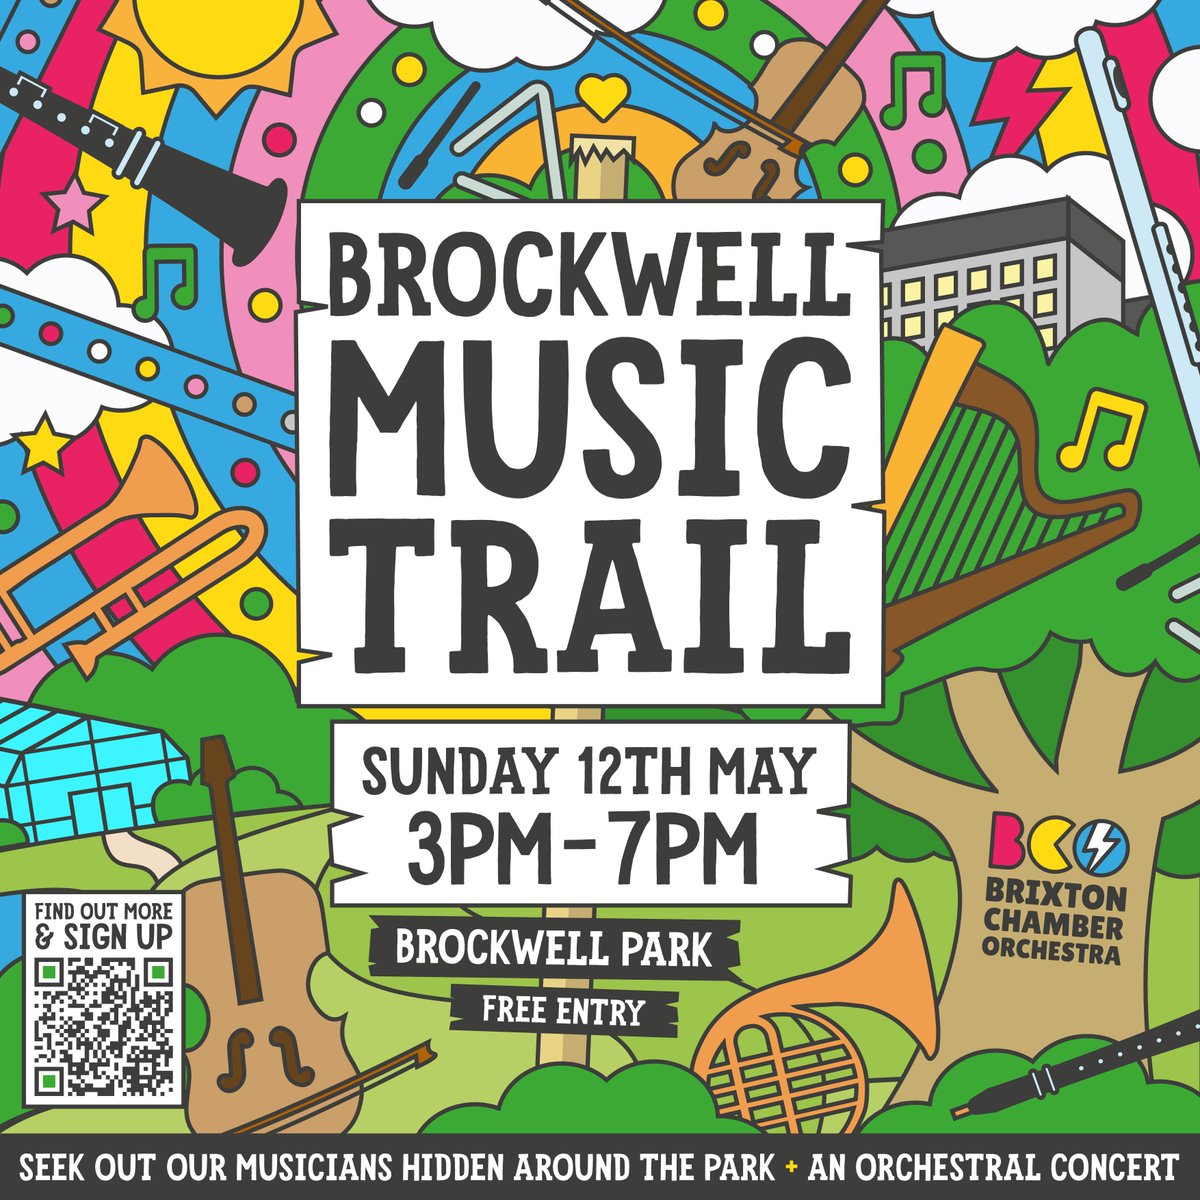 📣 Brockwell Music Trail 📣 📅 Sun 12th May 📍 Brockwell Park 🕜3pm-7pm 🆓 Free Entry We're hiding 9 groups of musicians across Brockwell Park for you to find! Grab a map, start the adventure, and later enjoy a concert. Find out more and sign up via link in bio 🔗